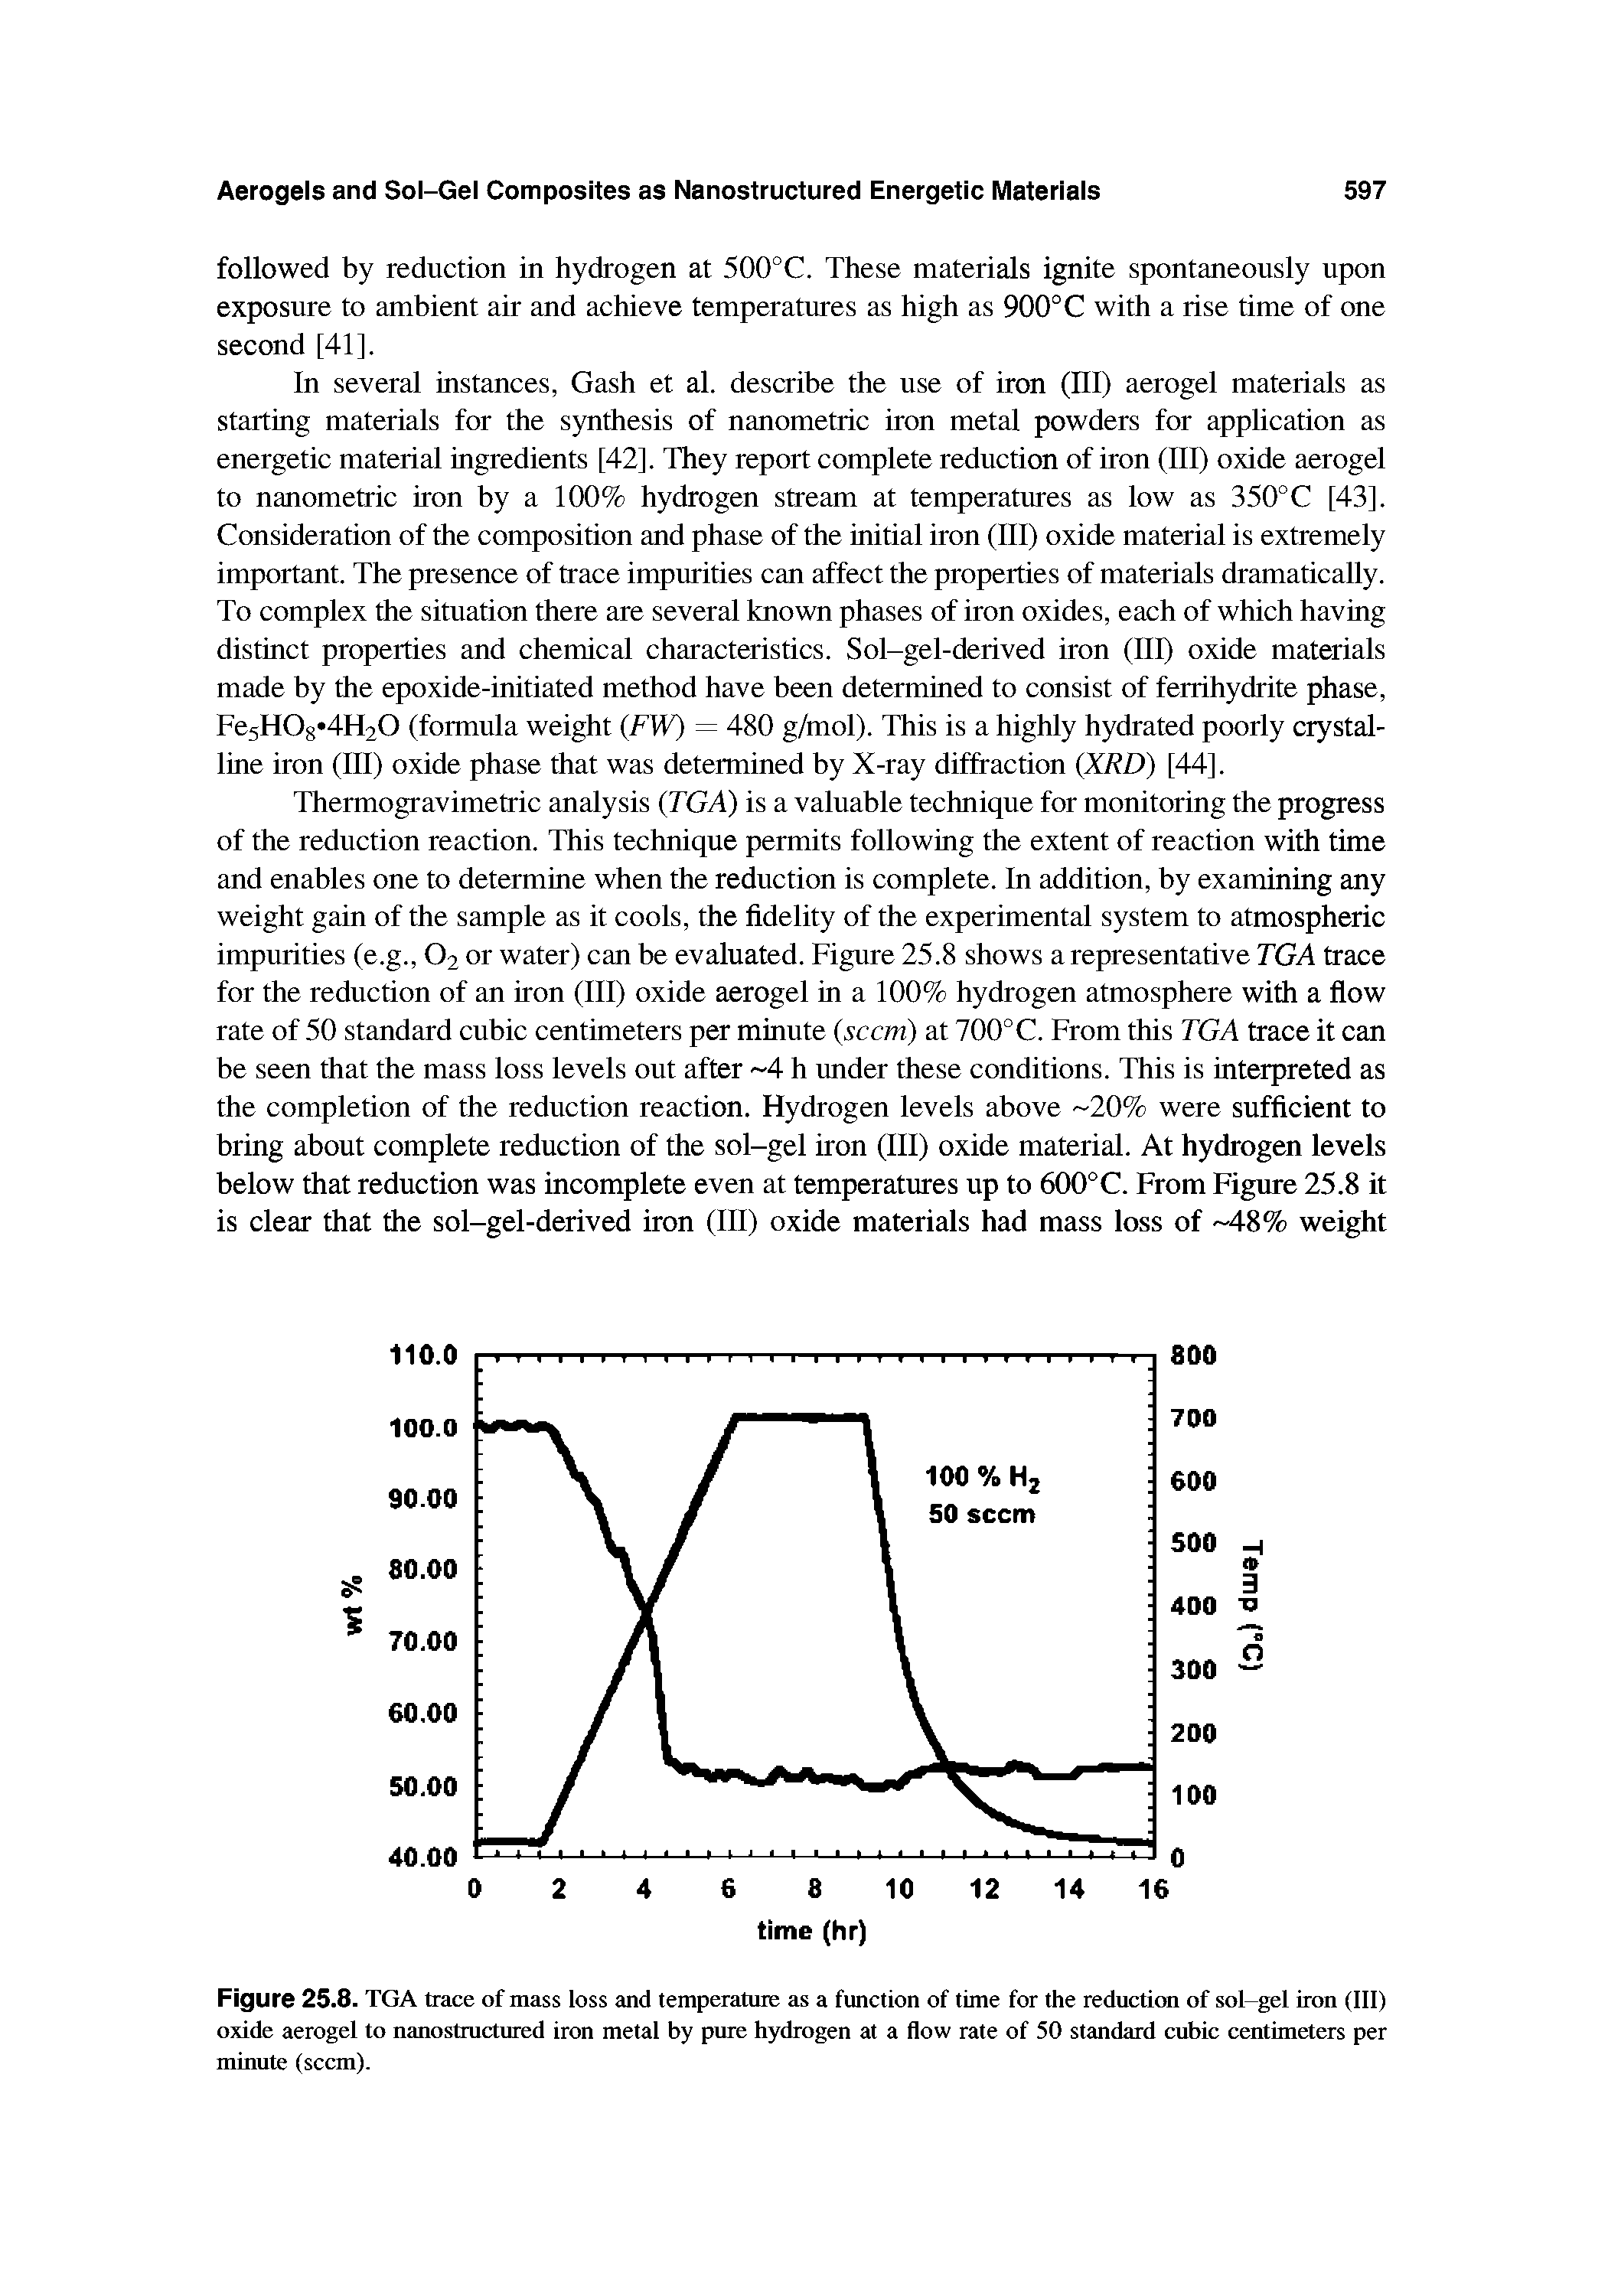 Figure 25.8. TGA trace of mass loss and temperature as a function of time for the reduction of sol el iron (III) oxide aerogel to nanostructured iron metal by pure hydrogen at a flow rate of 50 standard cubic centimeters per minute (seem).